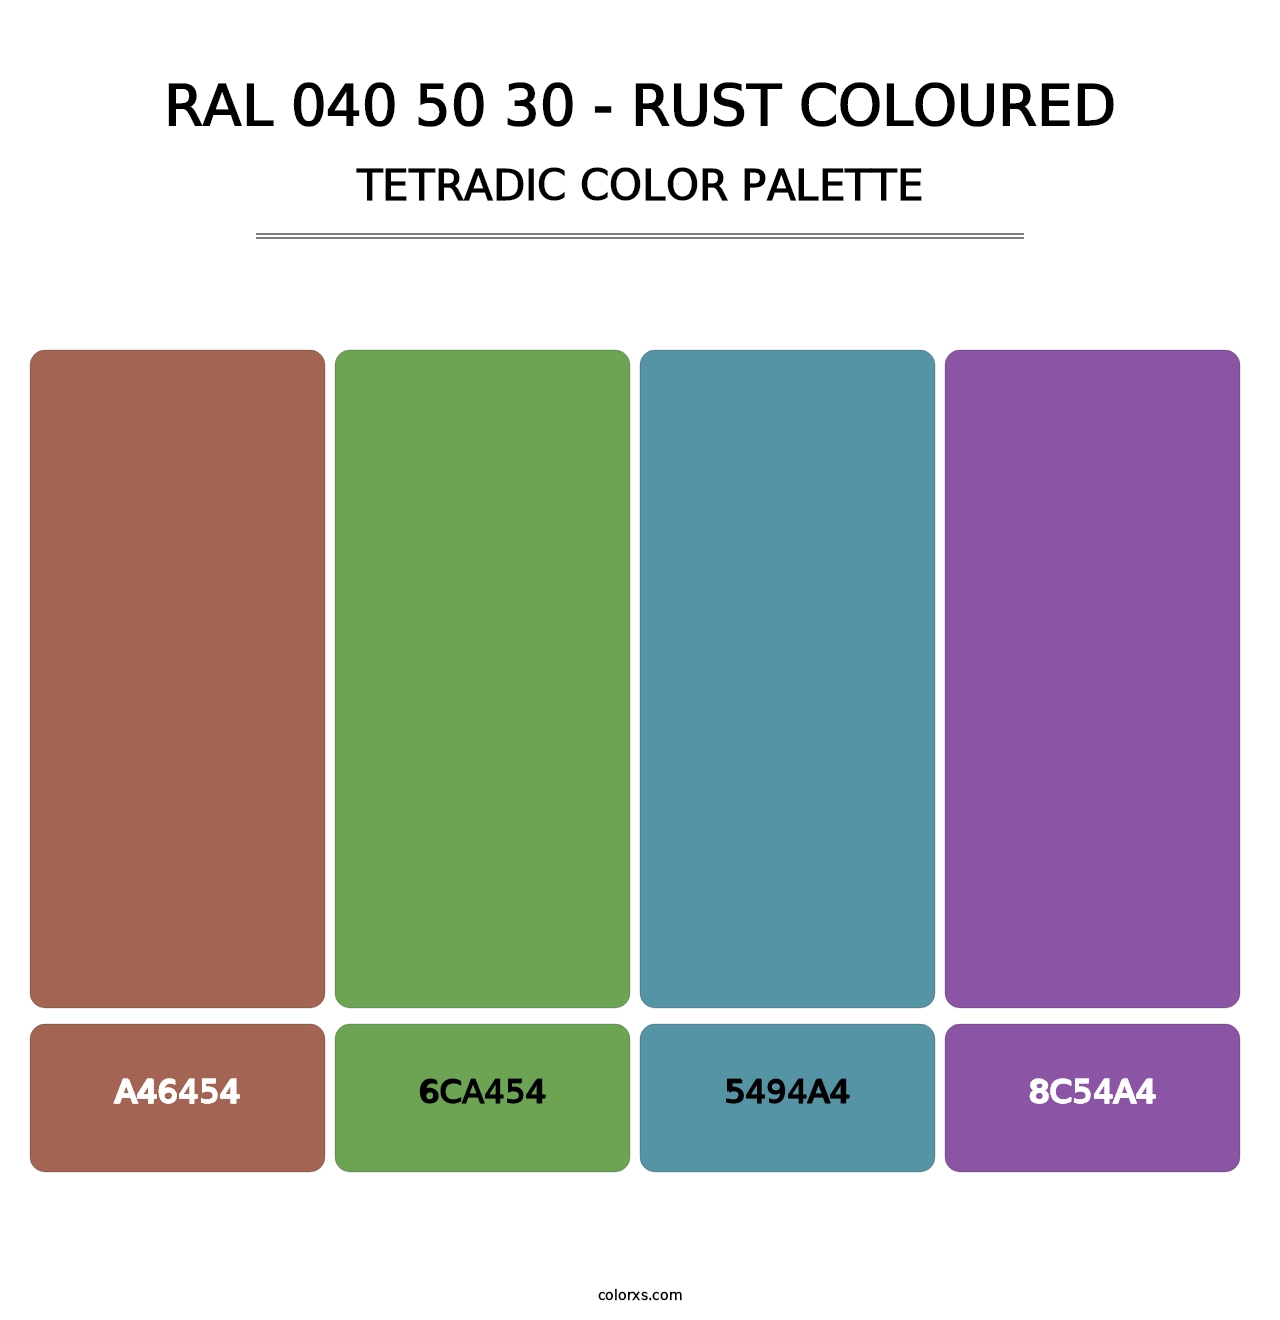 RAL 040 50 30 - Rust Coloured - Tetradic Color Palette